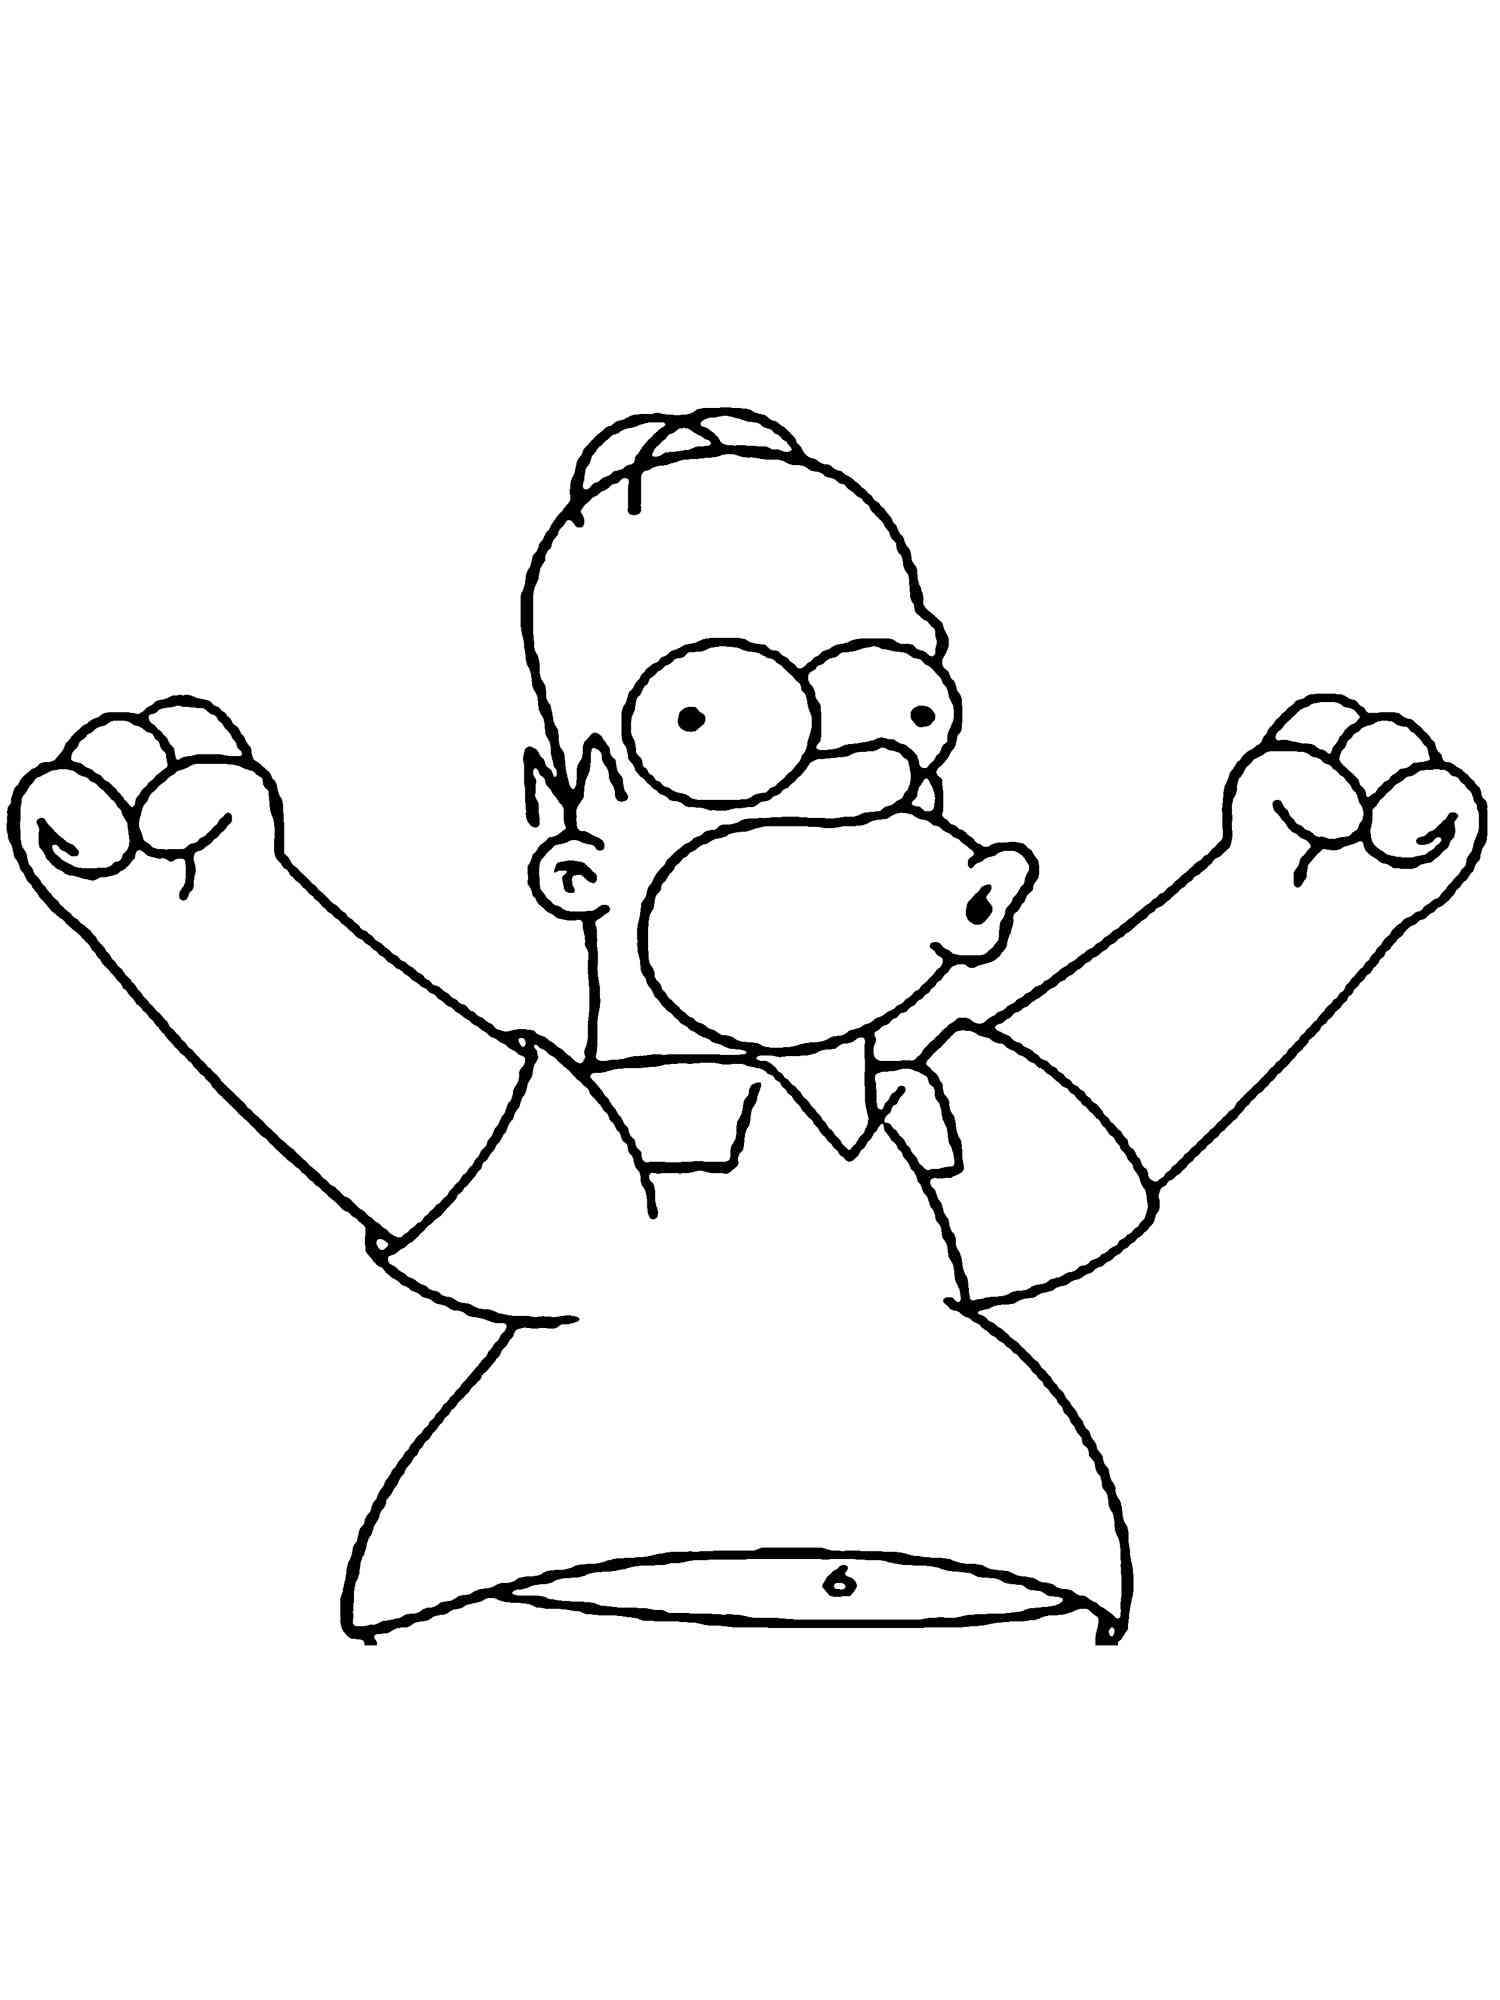 Homer Simpson 14 coloring page